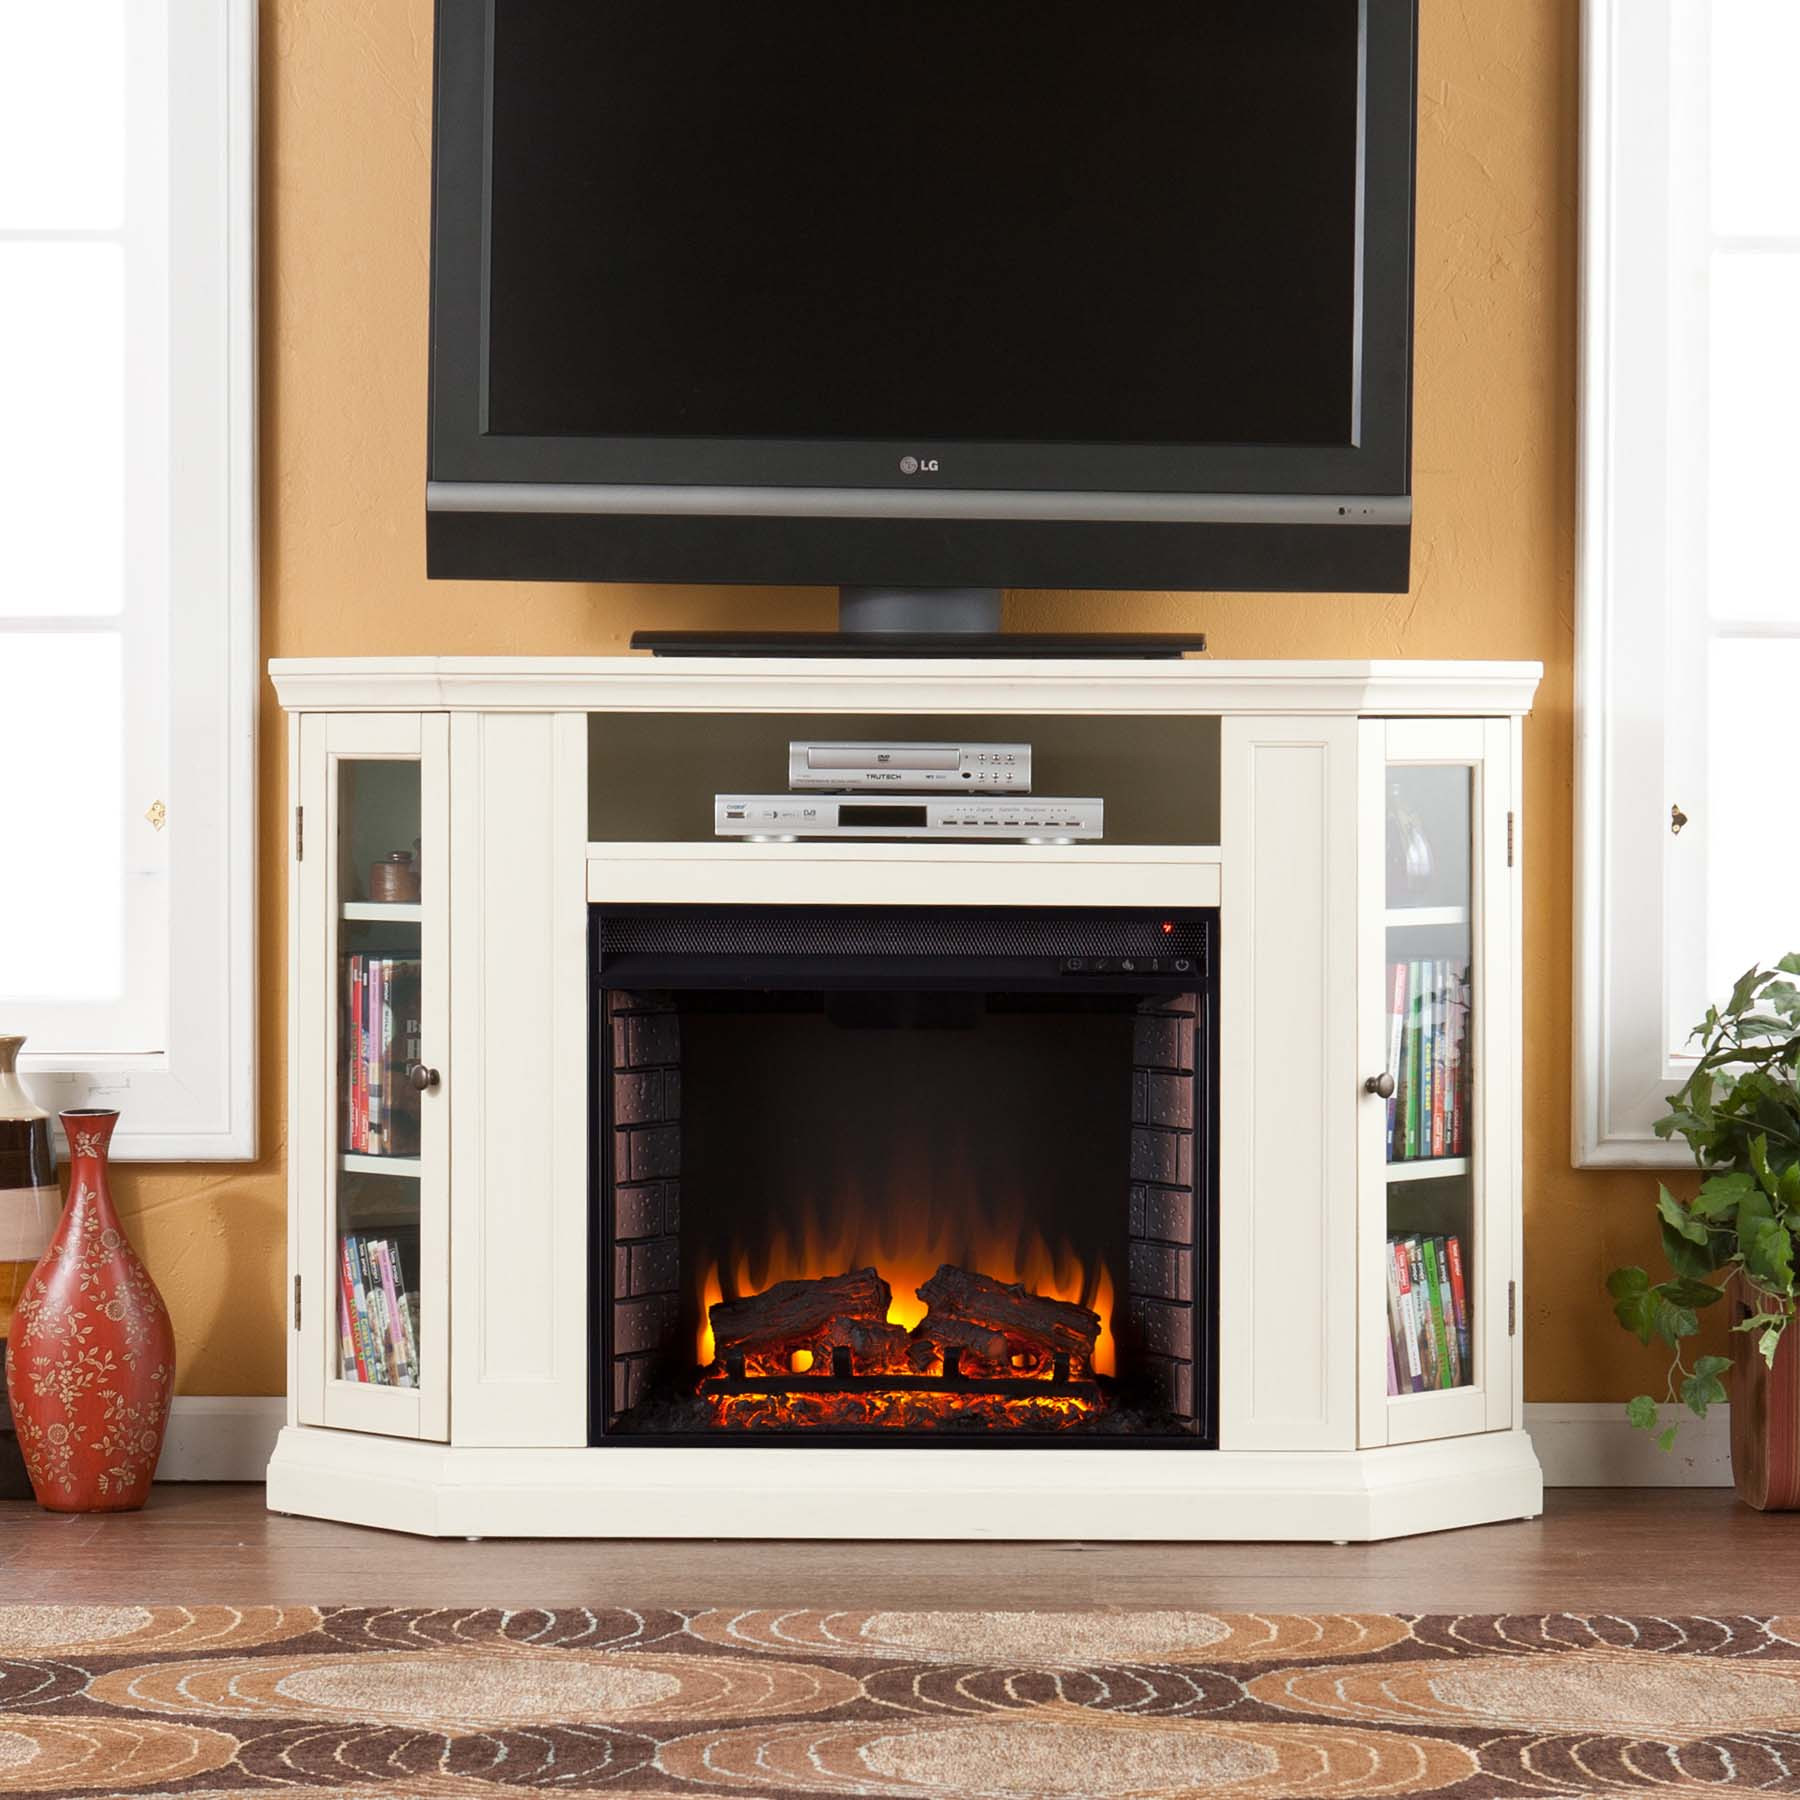 Big Electric Fireplace
 Tips for Buying an Electric Fireplace